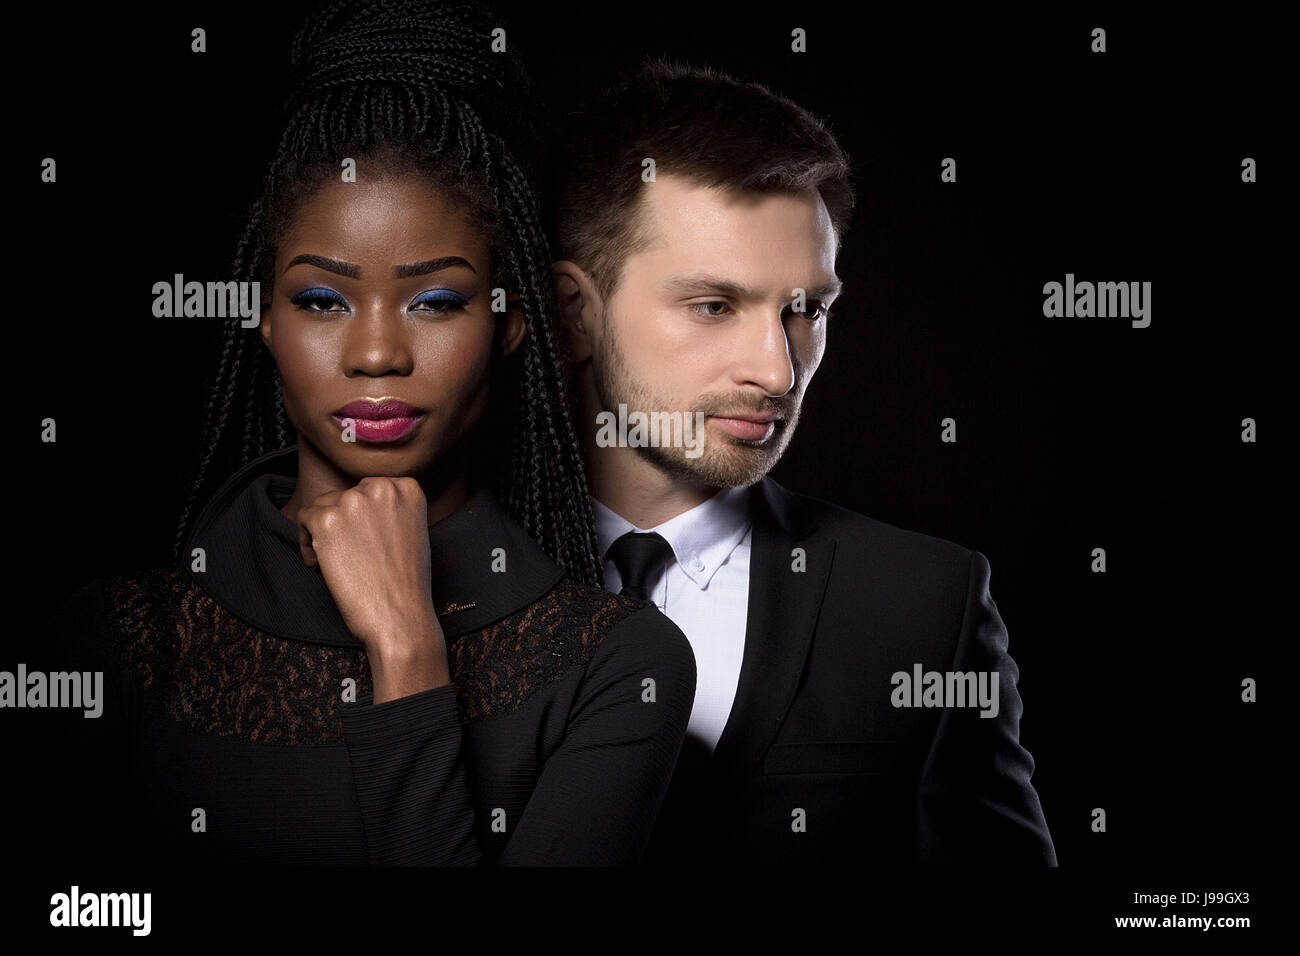 Close up portrait of multi ethnic man and woman. Stock Photo